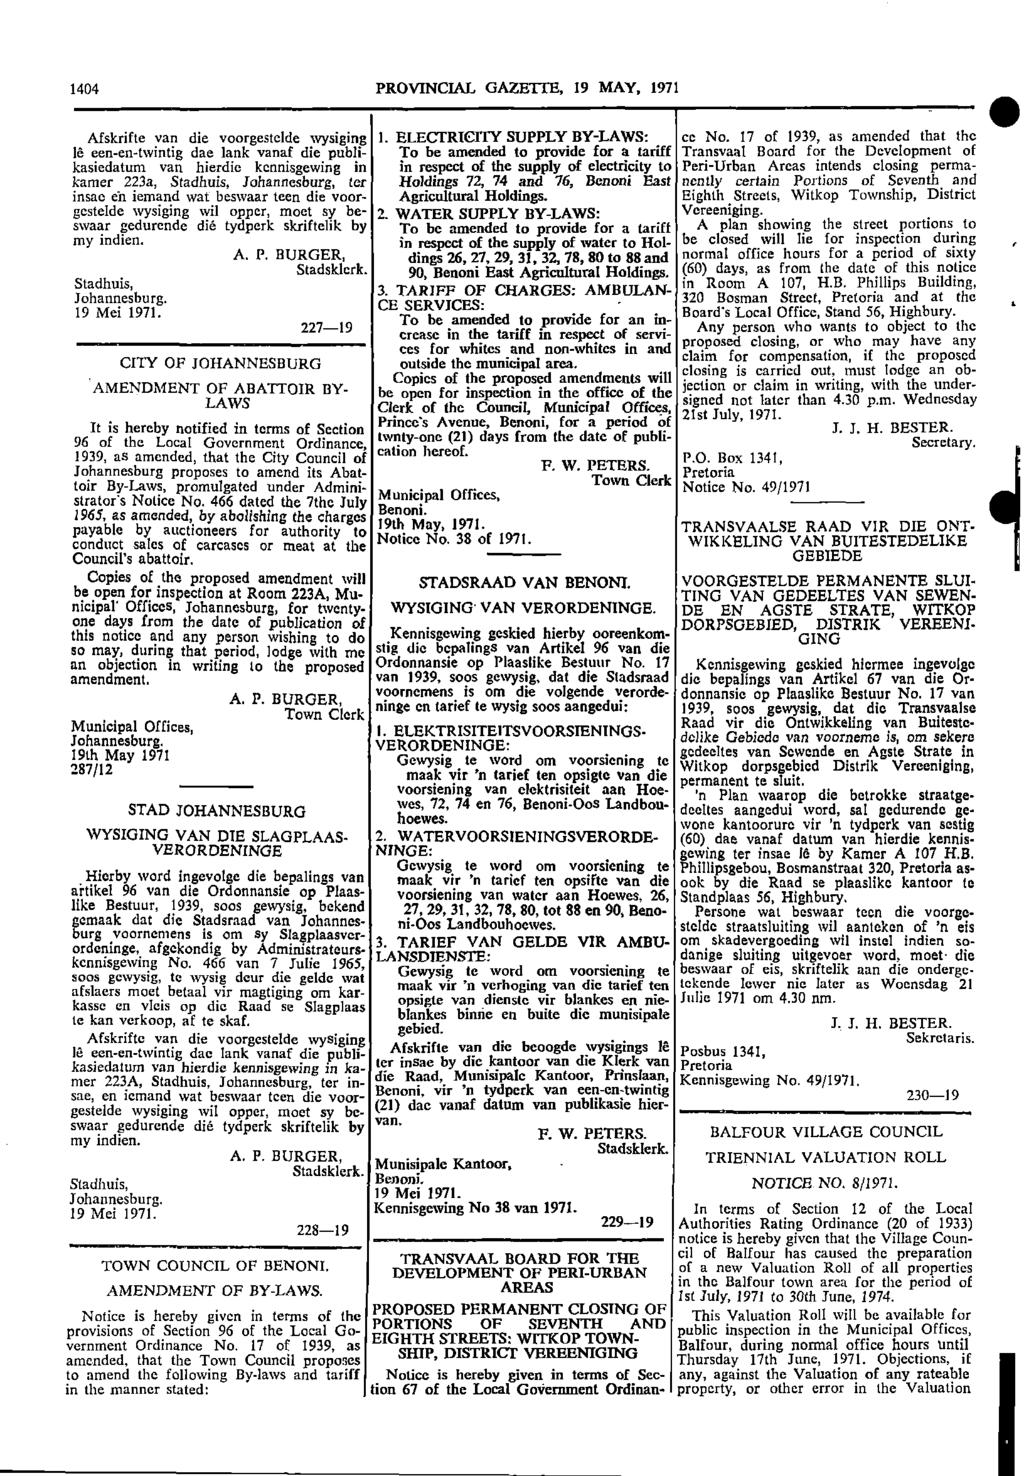 1404 PROVINCIAL GAZETTE 19 MAY 1971 0 Afskrifte van die voorgestelde wysiging 1 ELECTRICITY SUPPLY BYLAWS: cc No 17 of 1939 as amended that the le eenen twintig dae lank vanaf die publi To be amended